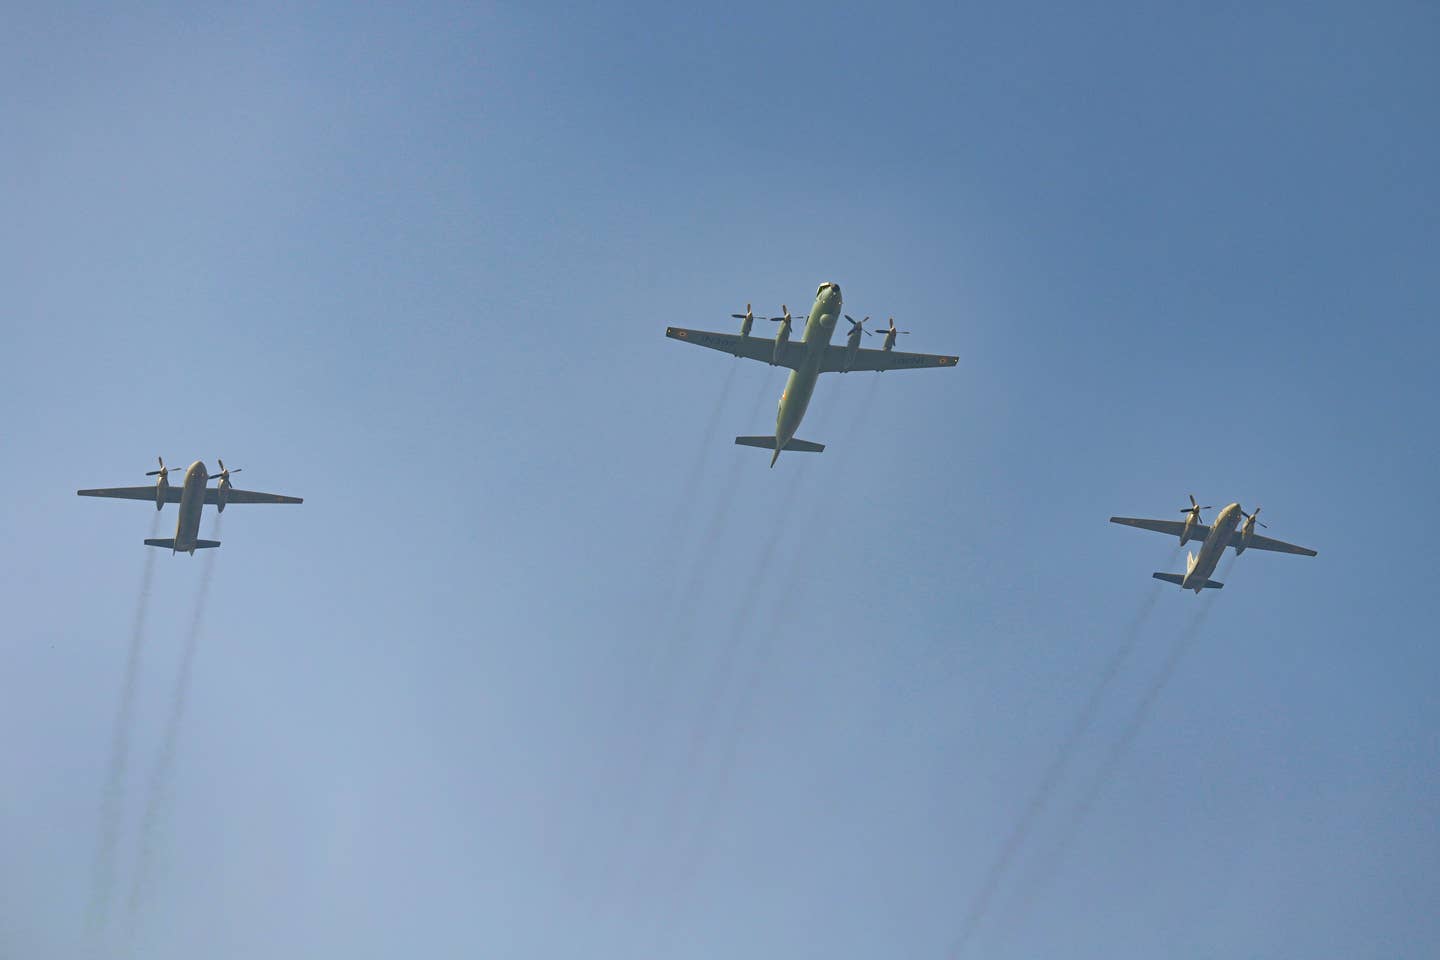 An Indian Navy Il-38SD flanked by Indian Air Force An-32 transports during the full dress rehearsal of the Republic Day Parade on January 23, 2023, in New Delhi. <em>Photo by Sanchit Khanna/Hindustan Times via Getty Images</em>